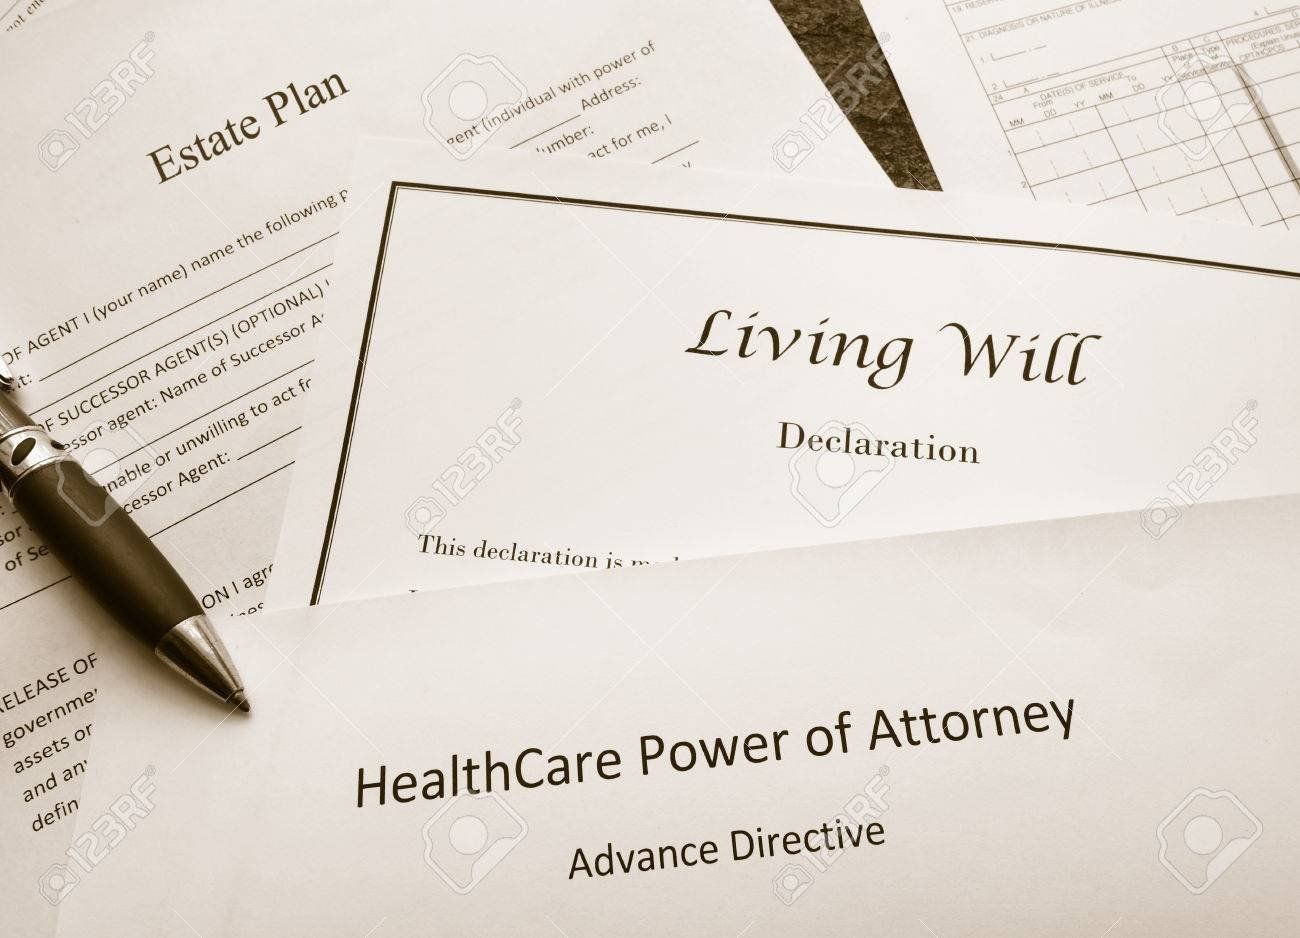 papers for healthcare power of attorney